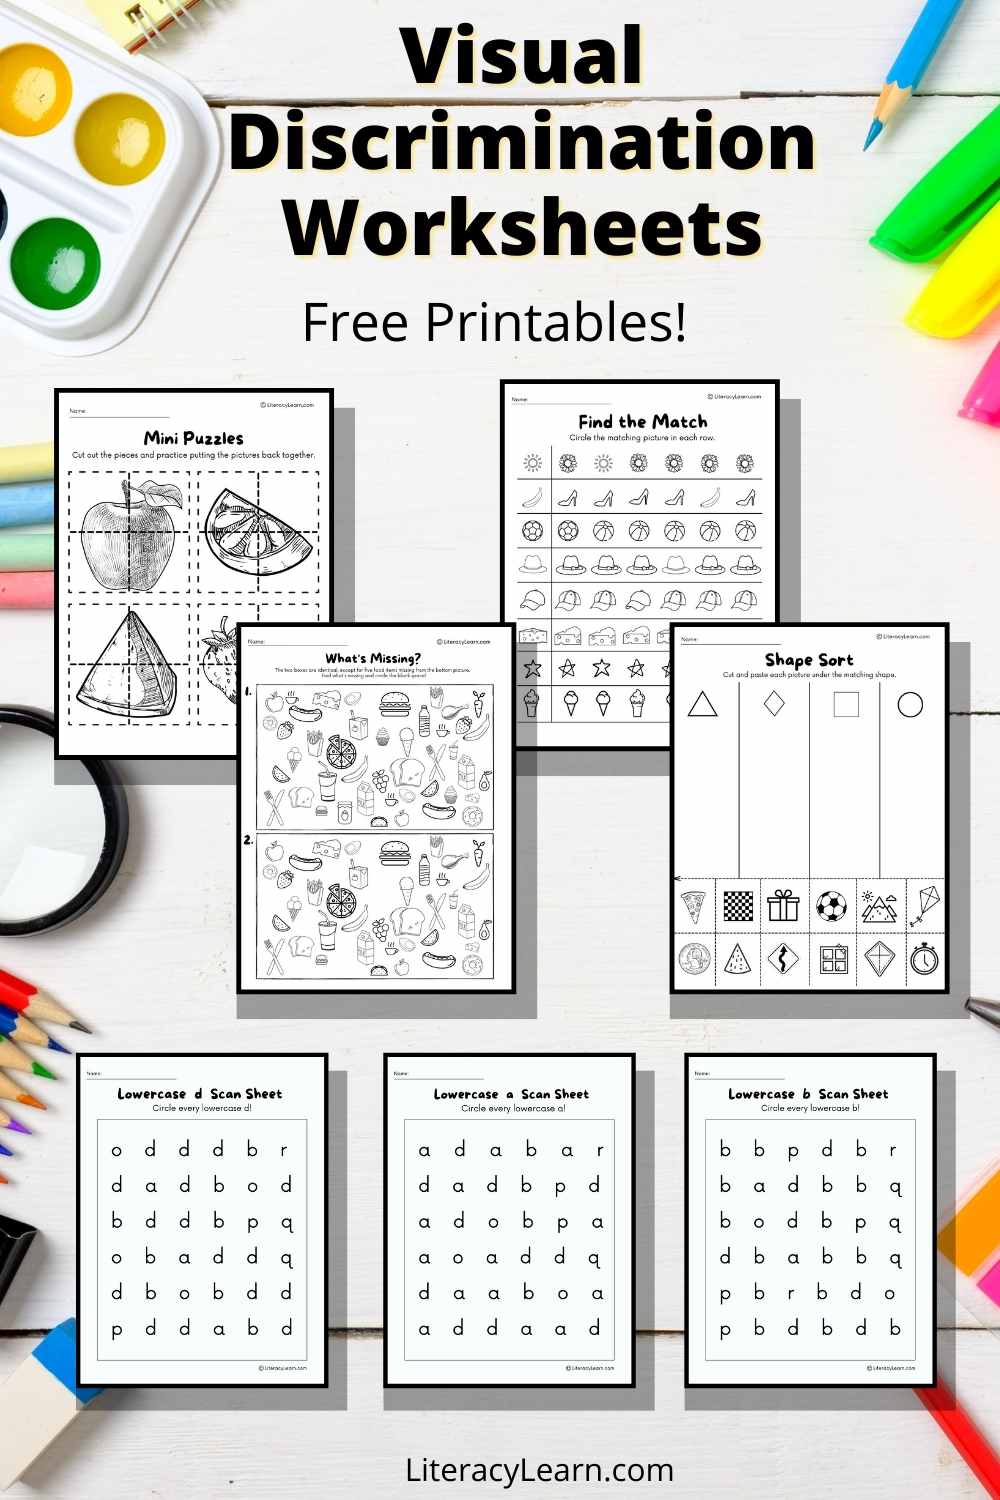 visual-discrimination-worksheets-free-printables-literacy-learn